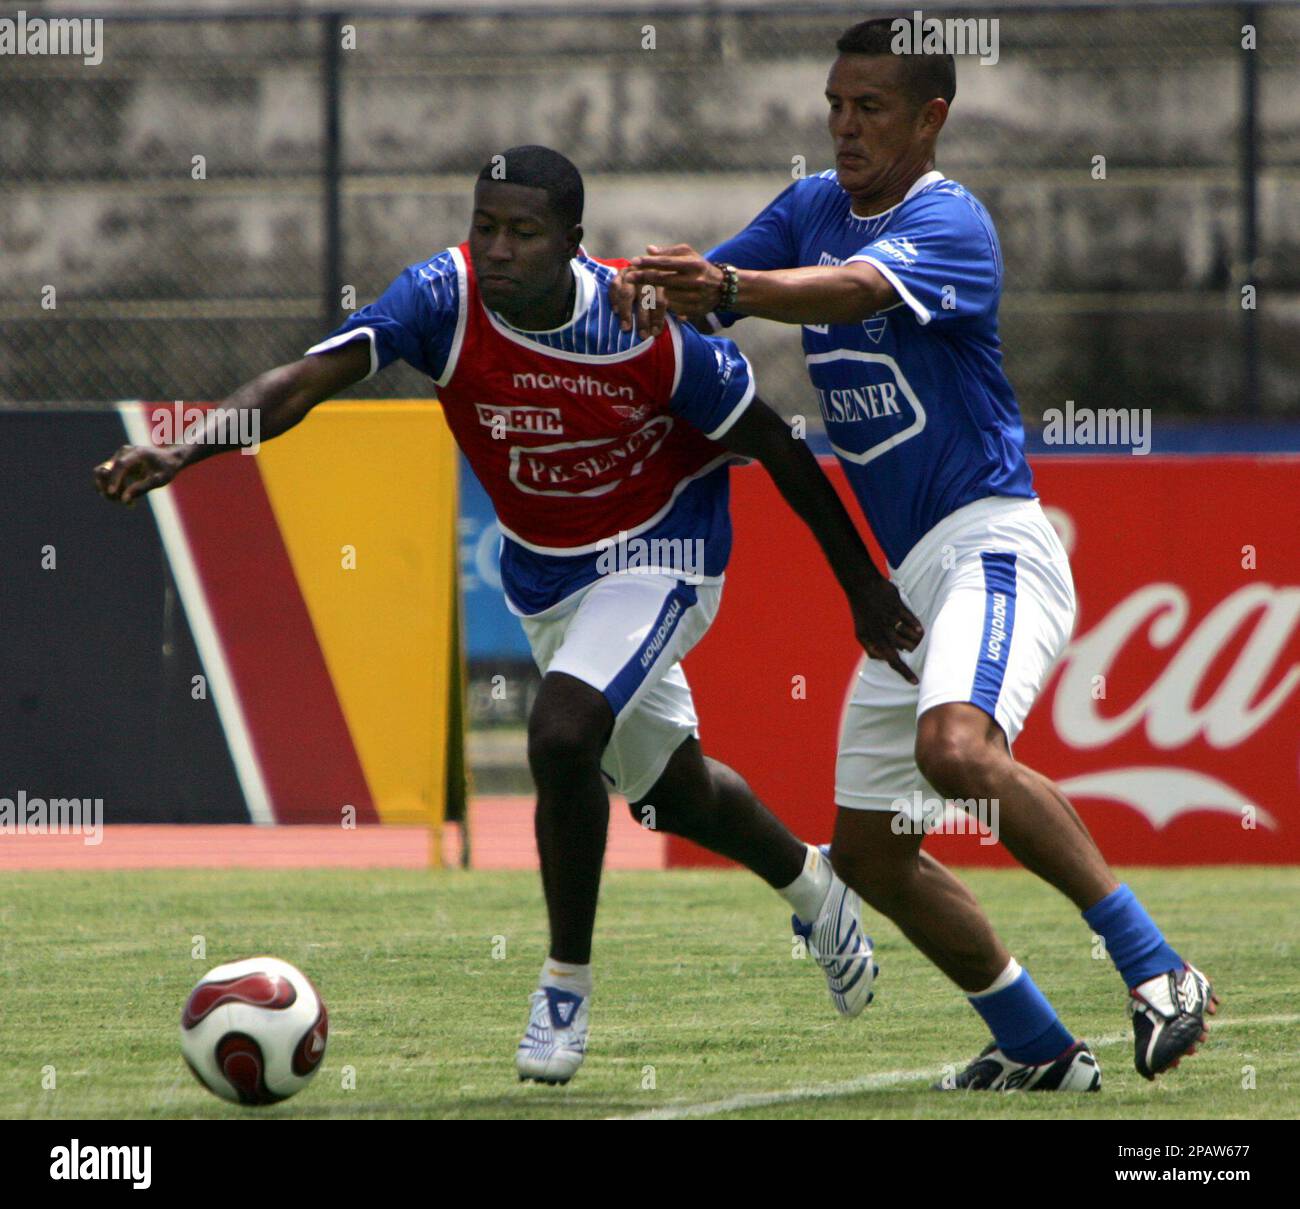 Ecuador's national soccer team players Carlos Castro, right, and Edison Mendez fight for the ball during a training session in Quito, Tuesday, Nov. 13, 2007. Ecuador will face Paraguay in a World Cup 2010 qualifying match in Asuncion next Nov. 17. (AP Photo/Dolores Ochoa) Stock Photo